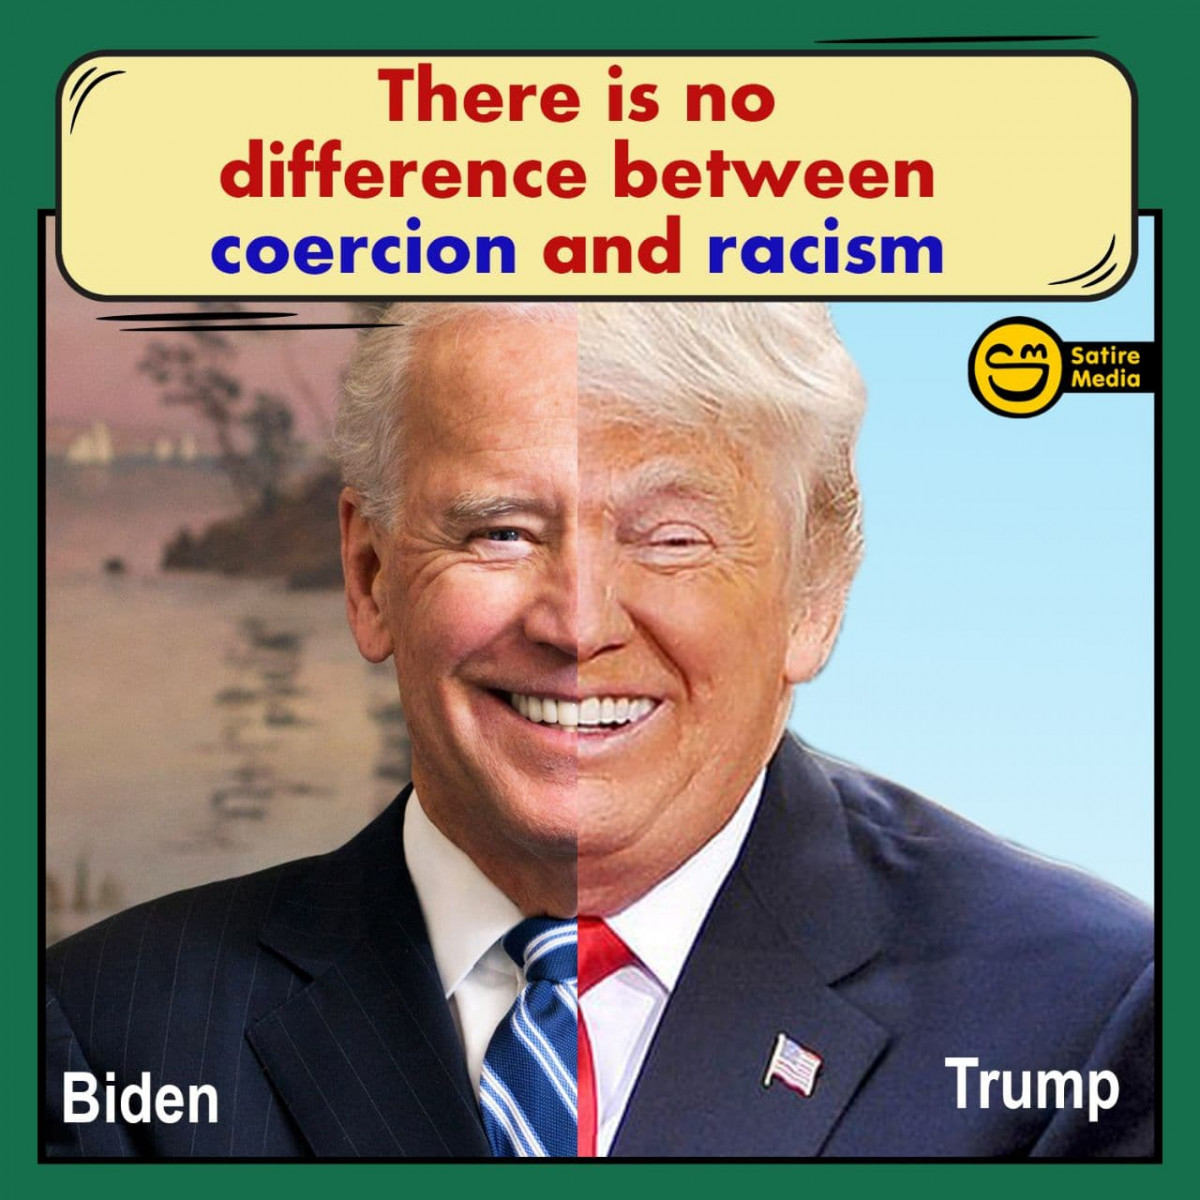 There is no difference between coercion and racism